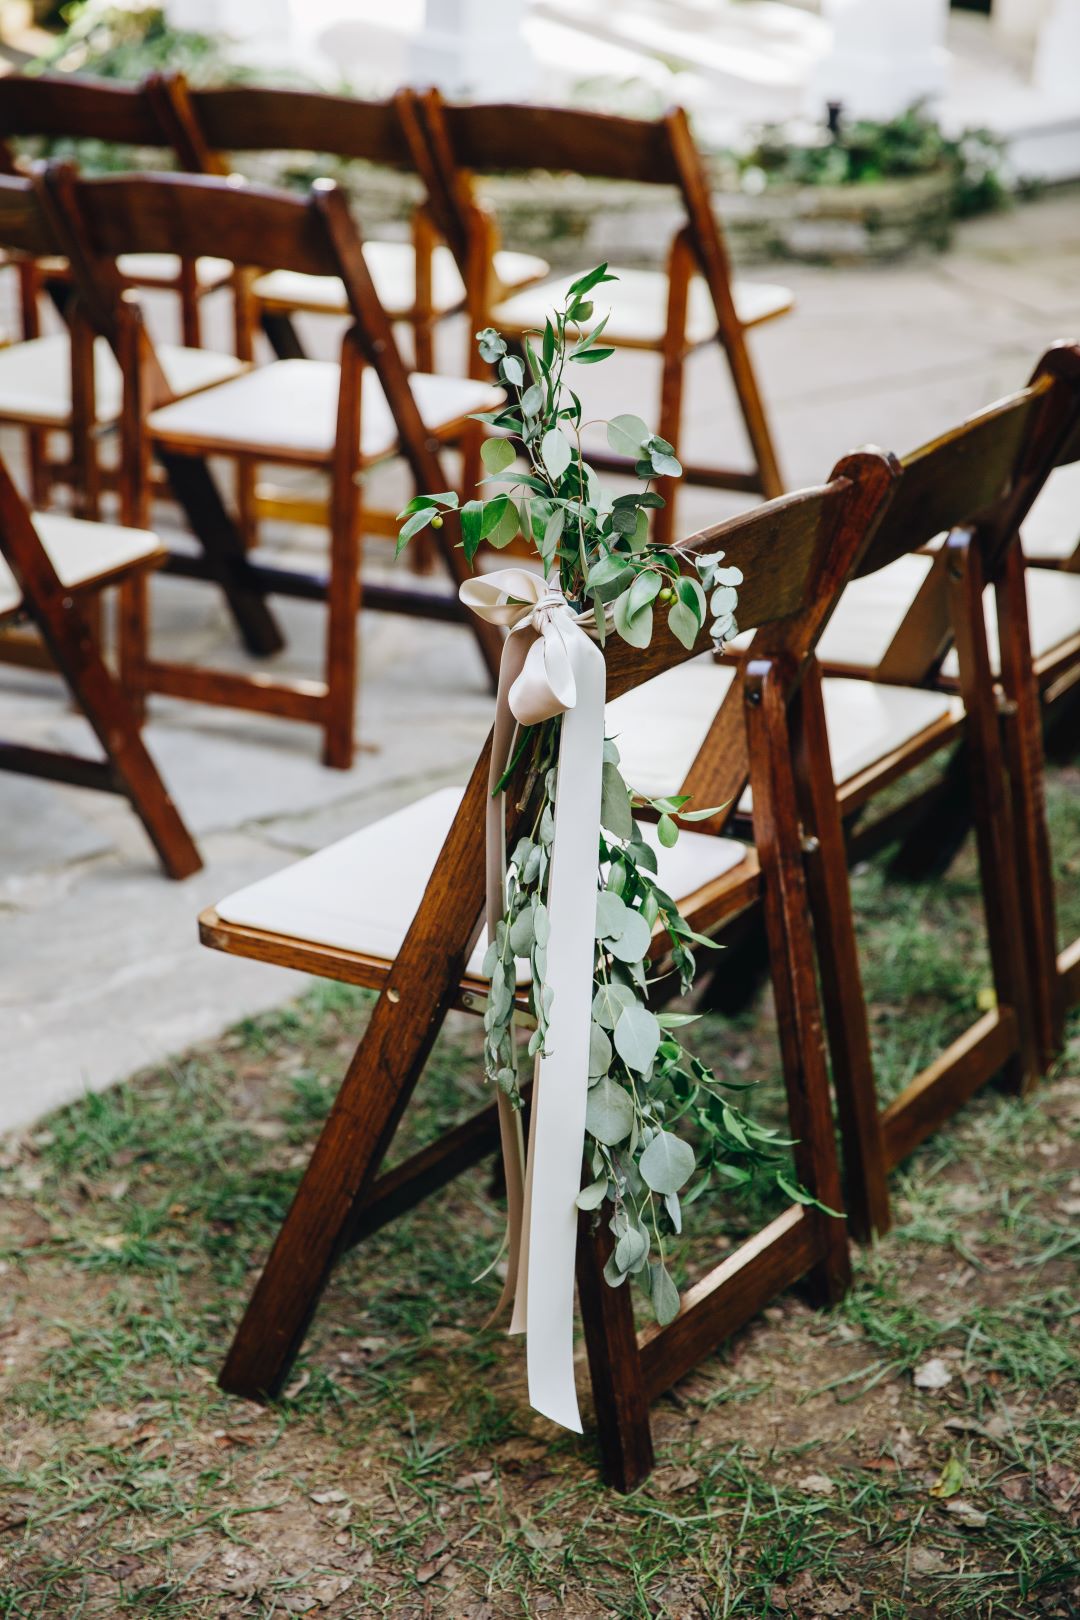 Eucalyptus accents on wedding ceremony chairs for earthy summer garden wedding in September, neutrals & greenery